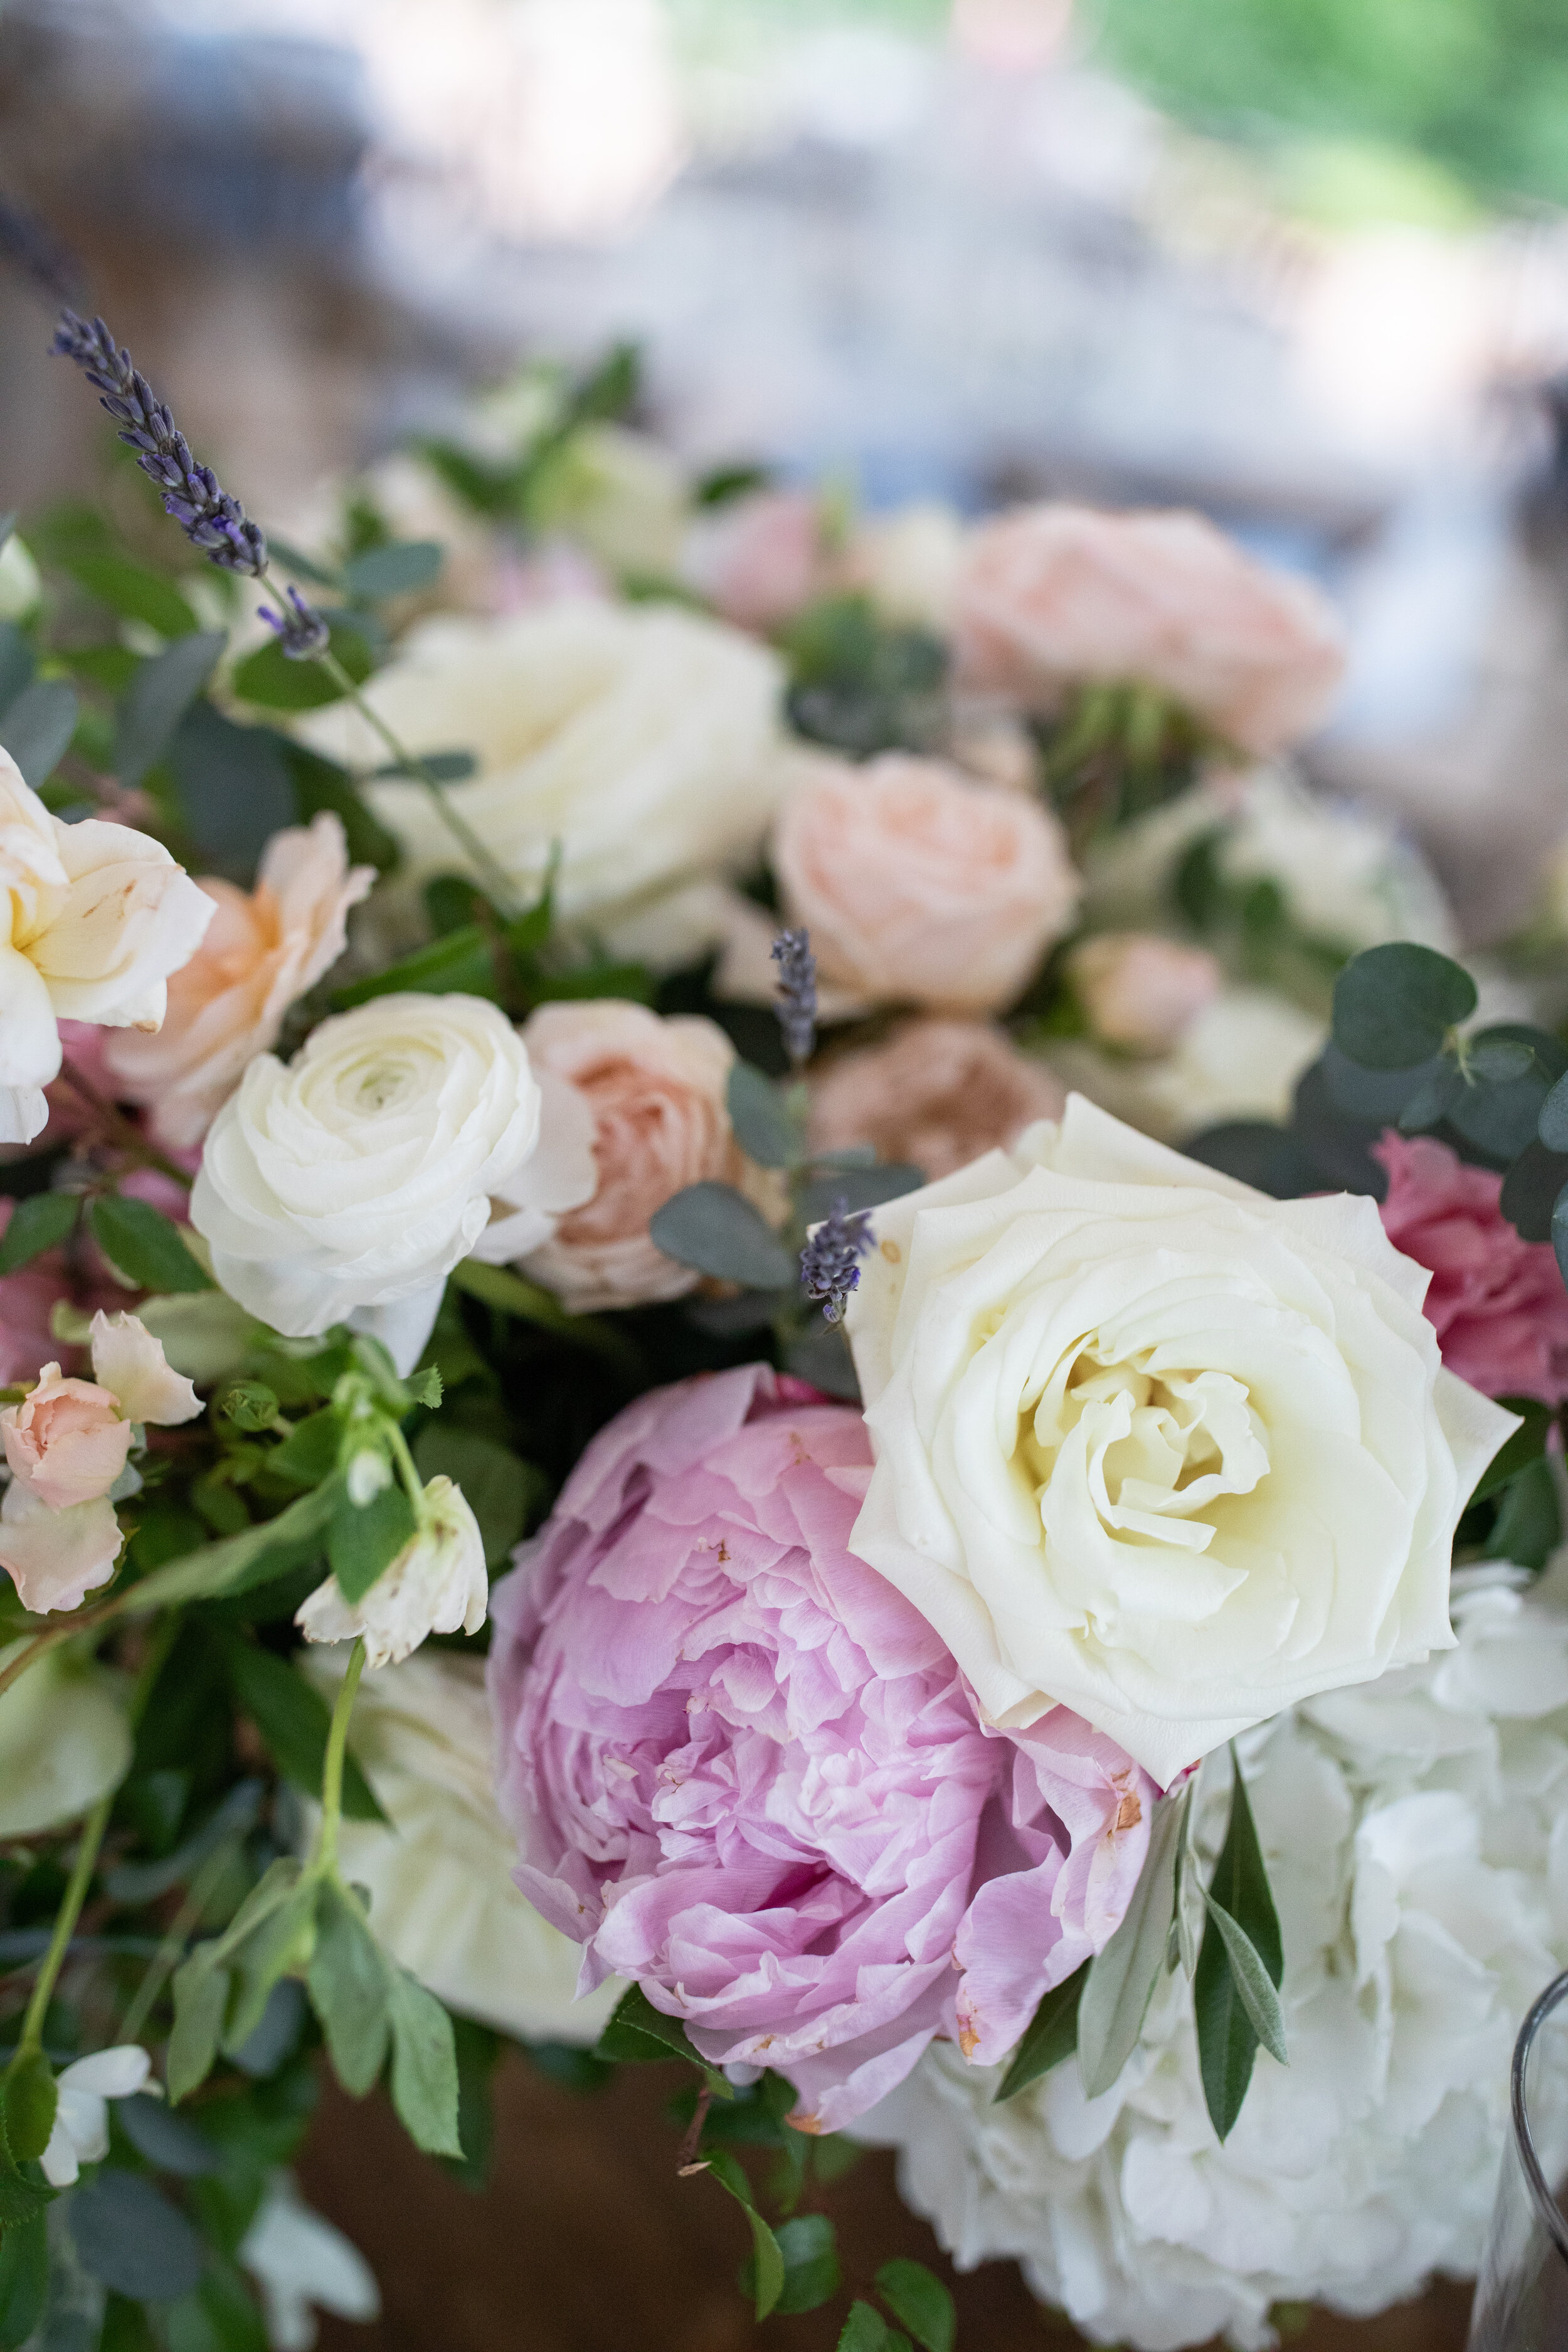 Low floral blush, ivory, and neutral centerpieces with hydrangeas, peonies, garden roses, ranunculus, ferns, and olives branches. Belle Meade Plantation wedding and event florist.